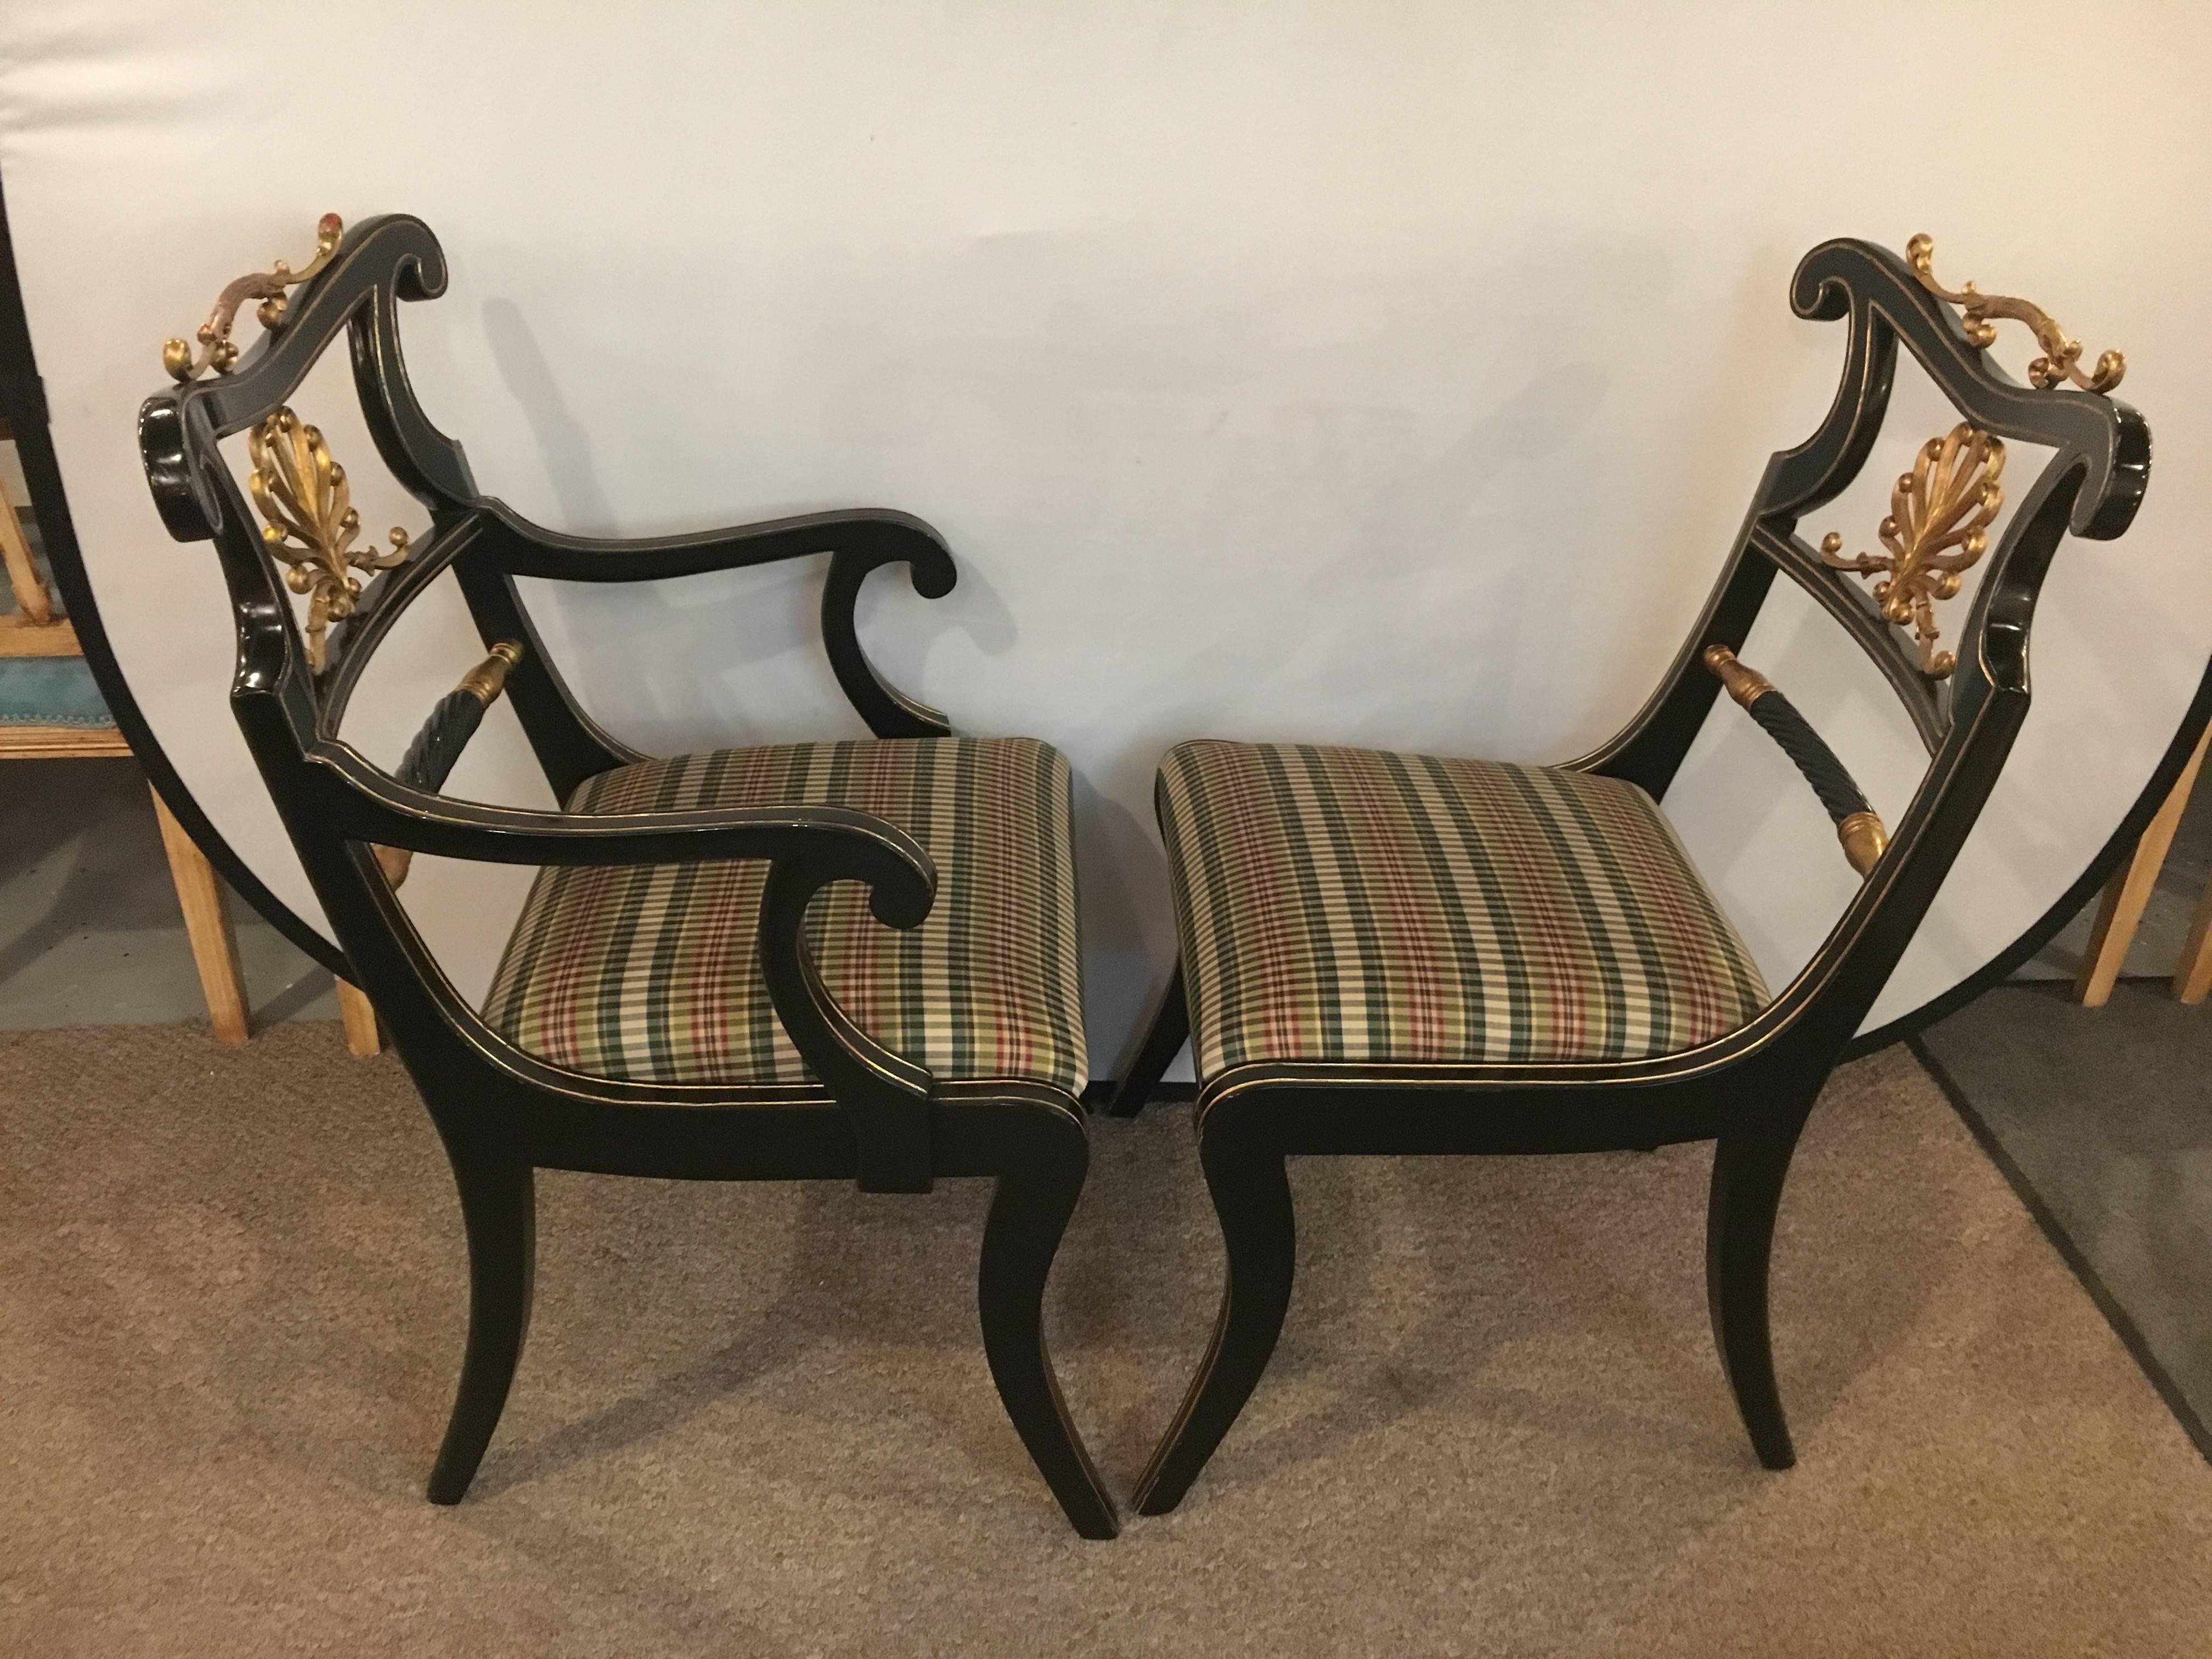 Set of six neoclassical style ebonized and brass-mounted dining chairs. Pair of armchairs and four side chairs of custom quality make up this unique set. Each having gilt metal back splats and metal handles on top rail. This fine ebonized set of